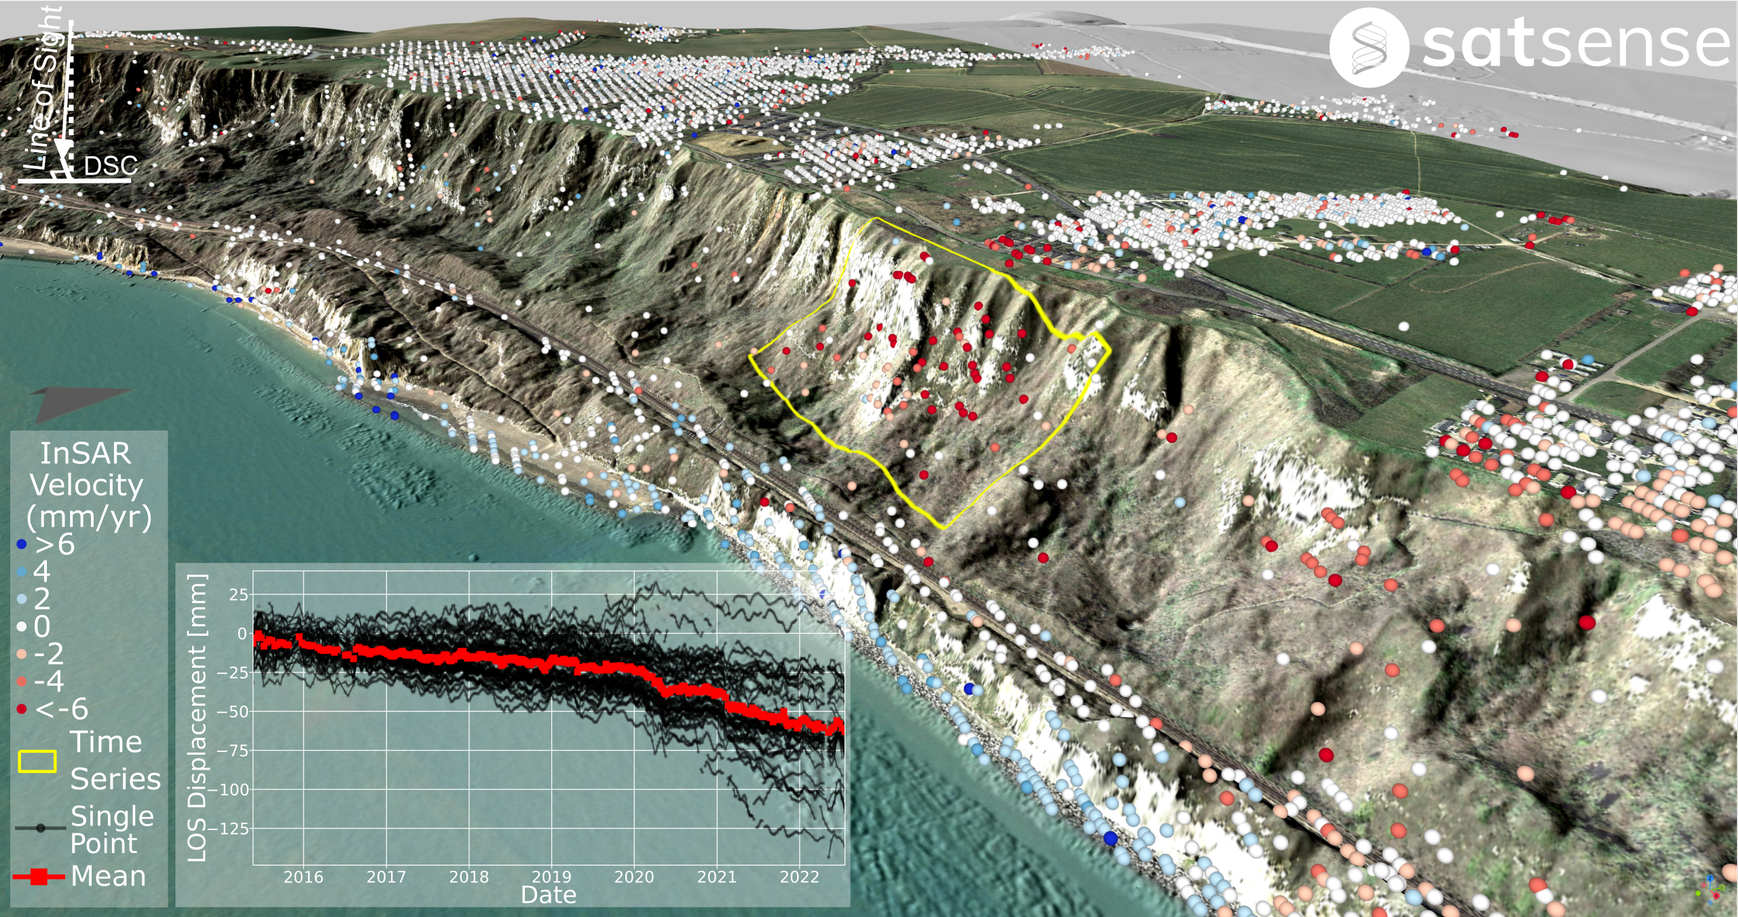 3 D image of folkeston warren indicating downward displacement of ground from 2016 to 2022 with good InSAR coverage on and near the site